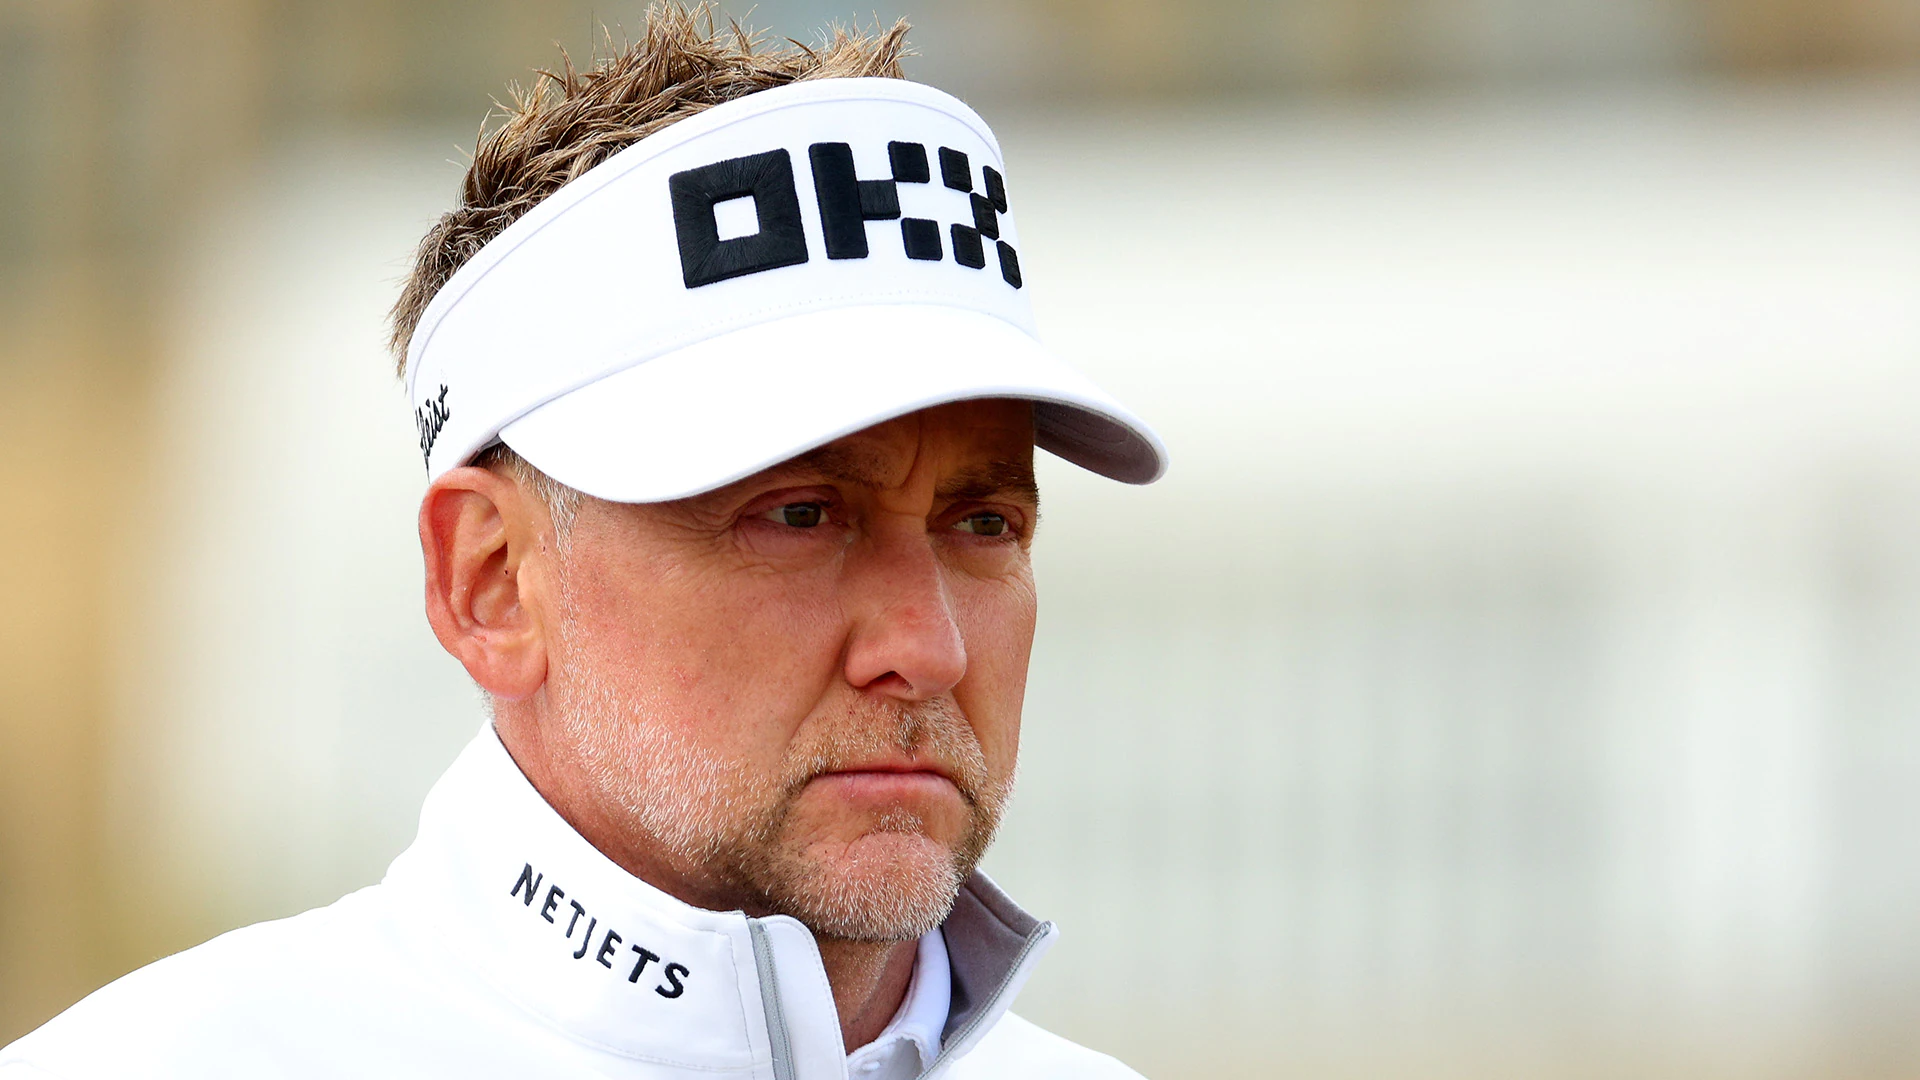 LIV distraction looms large for Poulter, others: ‘This could probably be my last Open’